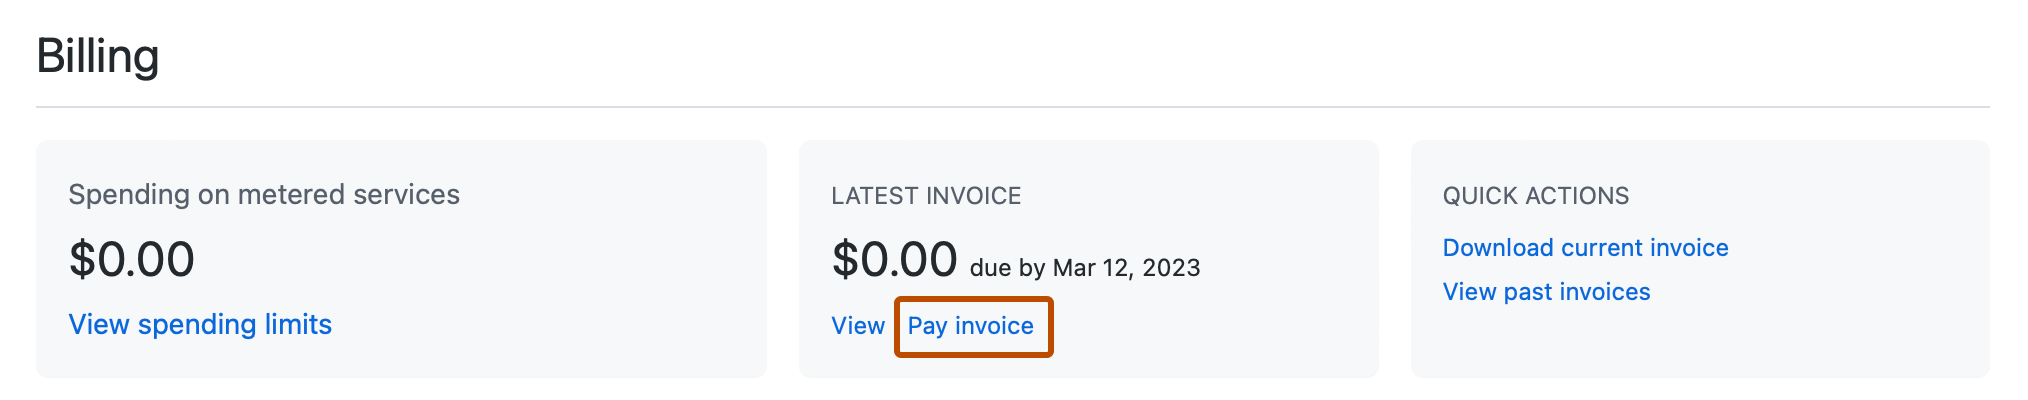 Pay invoice link